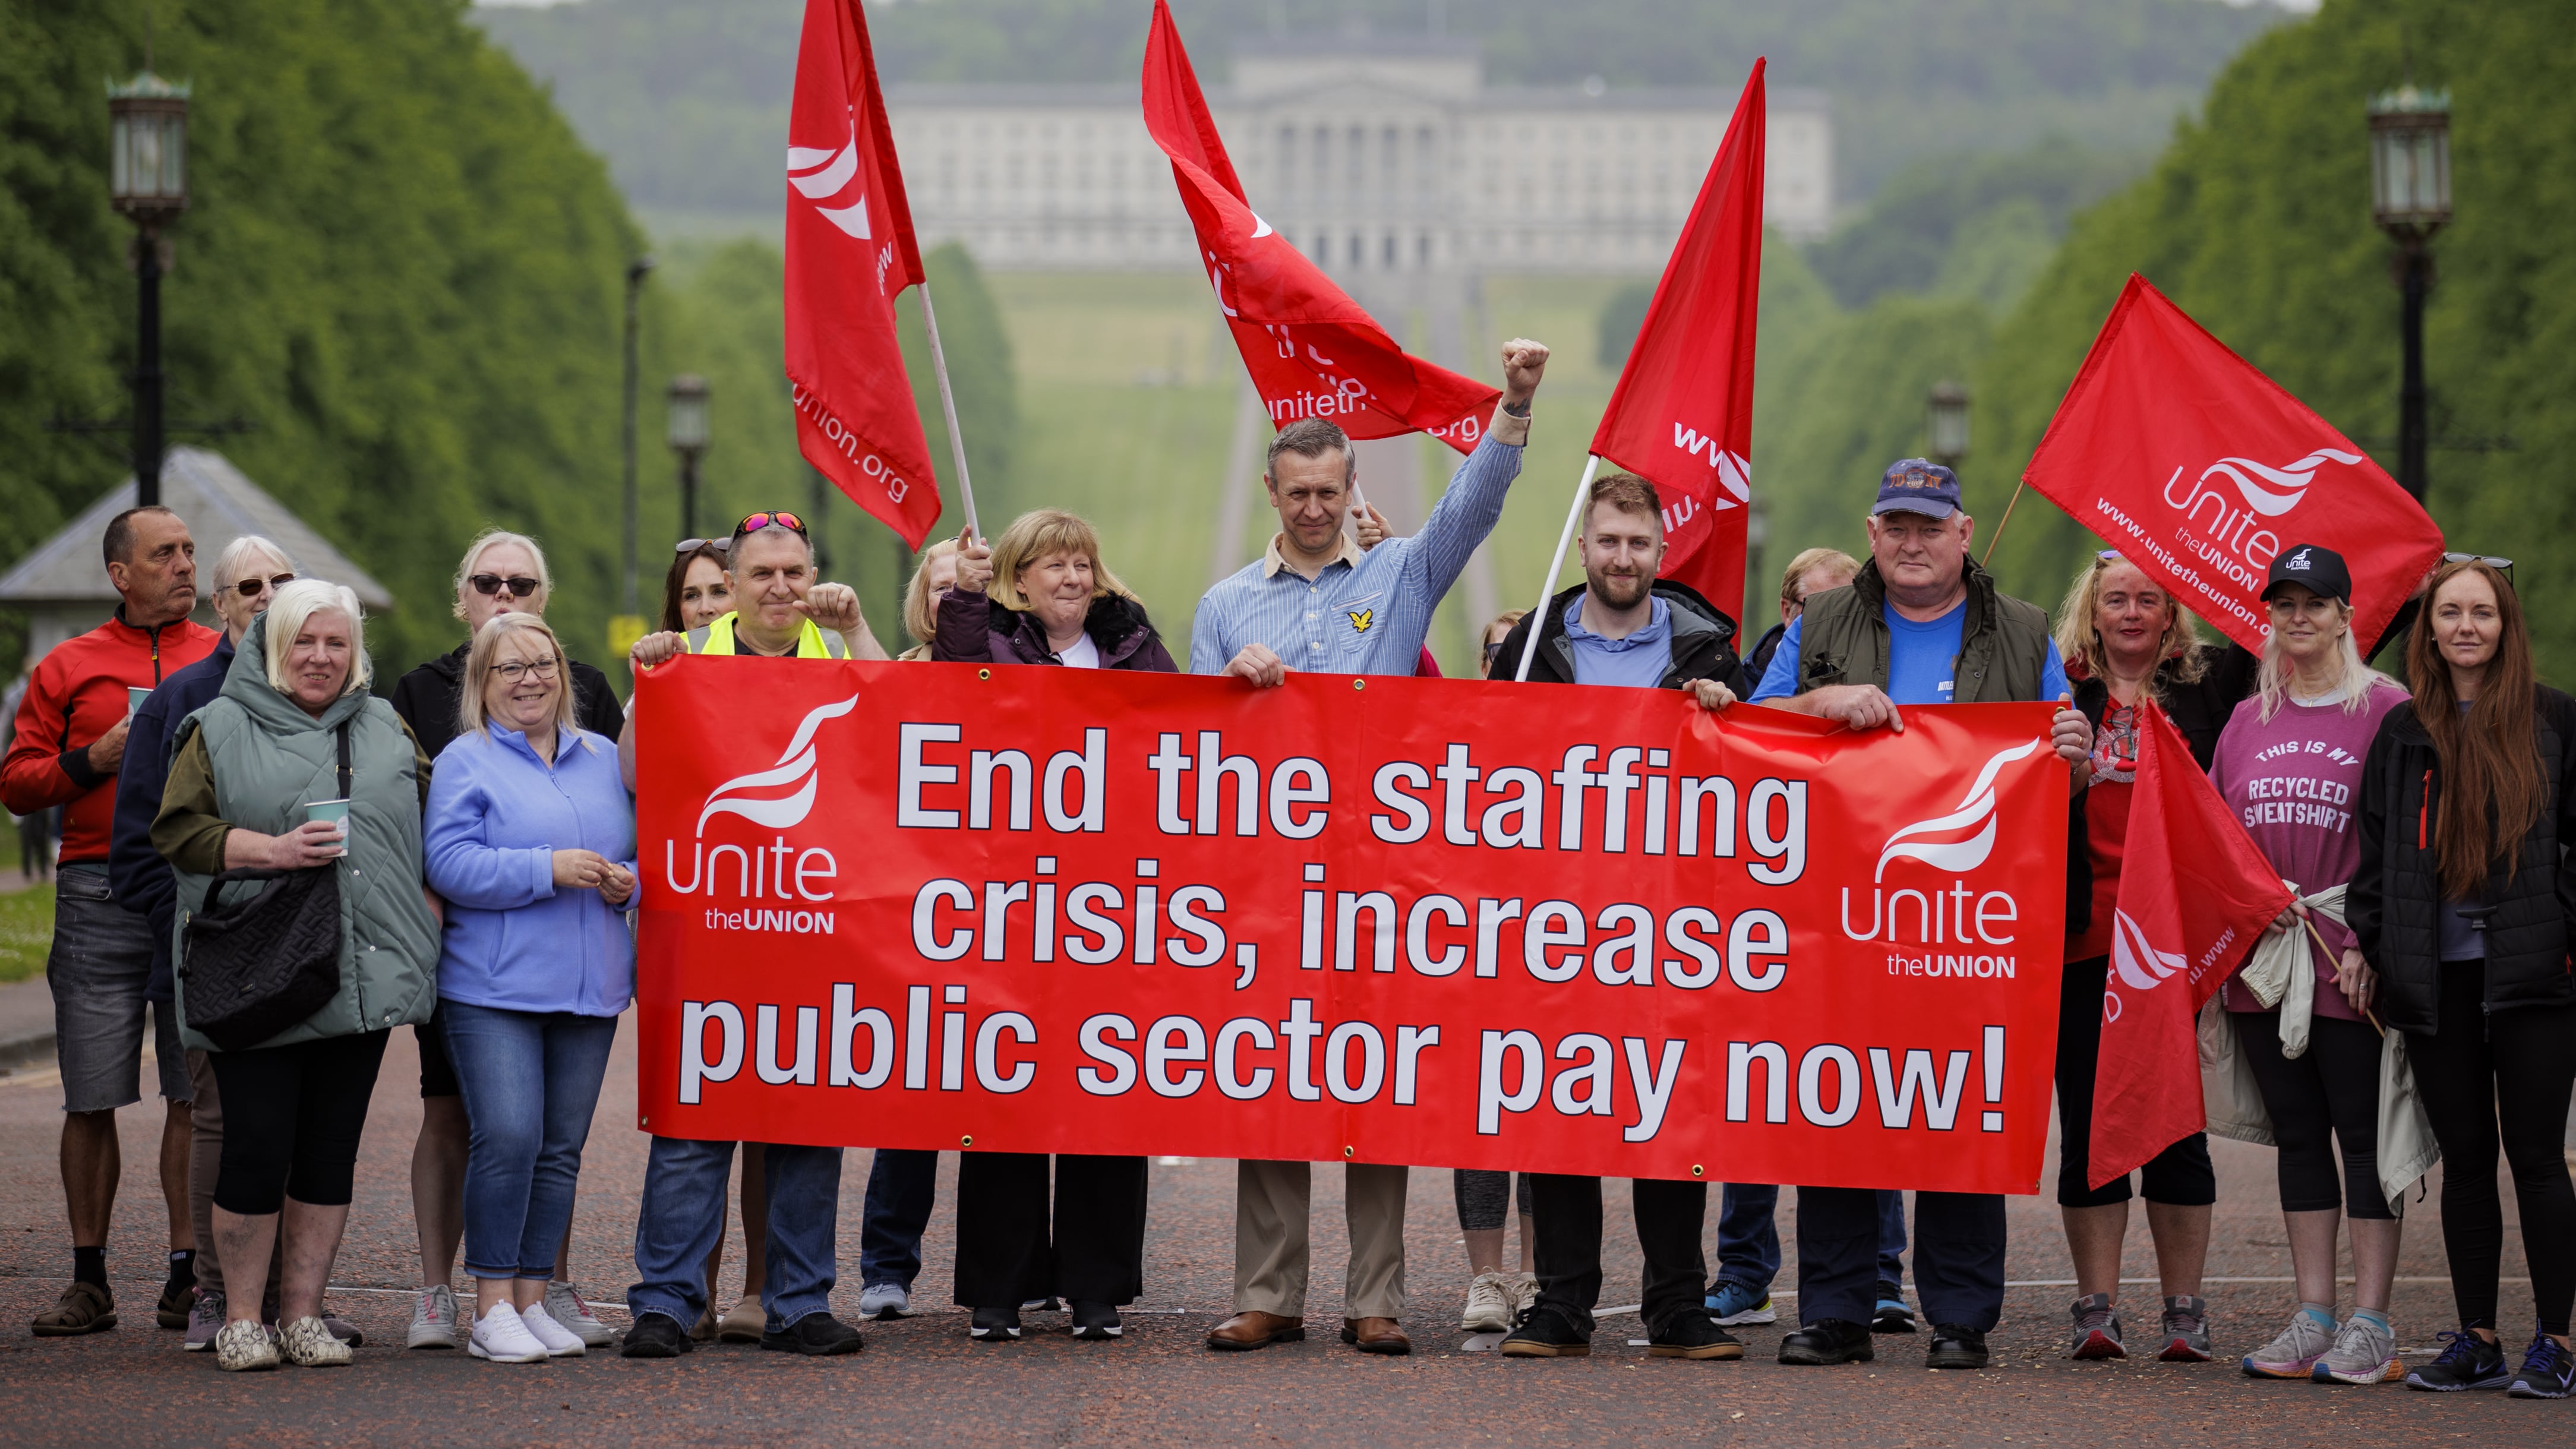 Education workers have suspended strike action